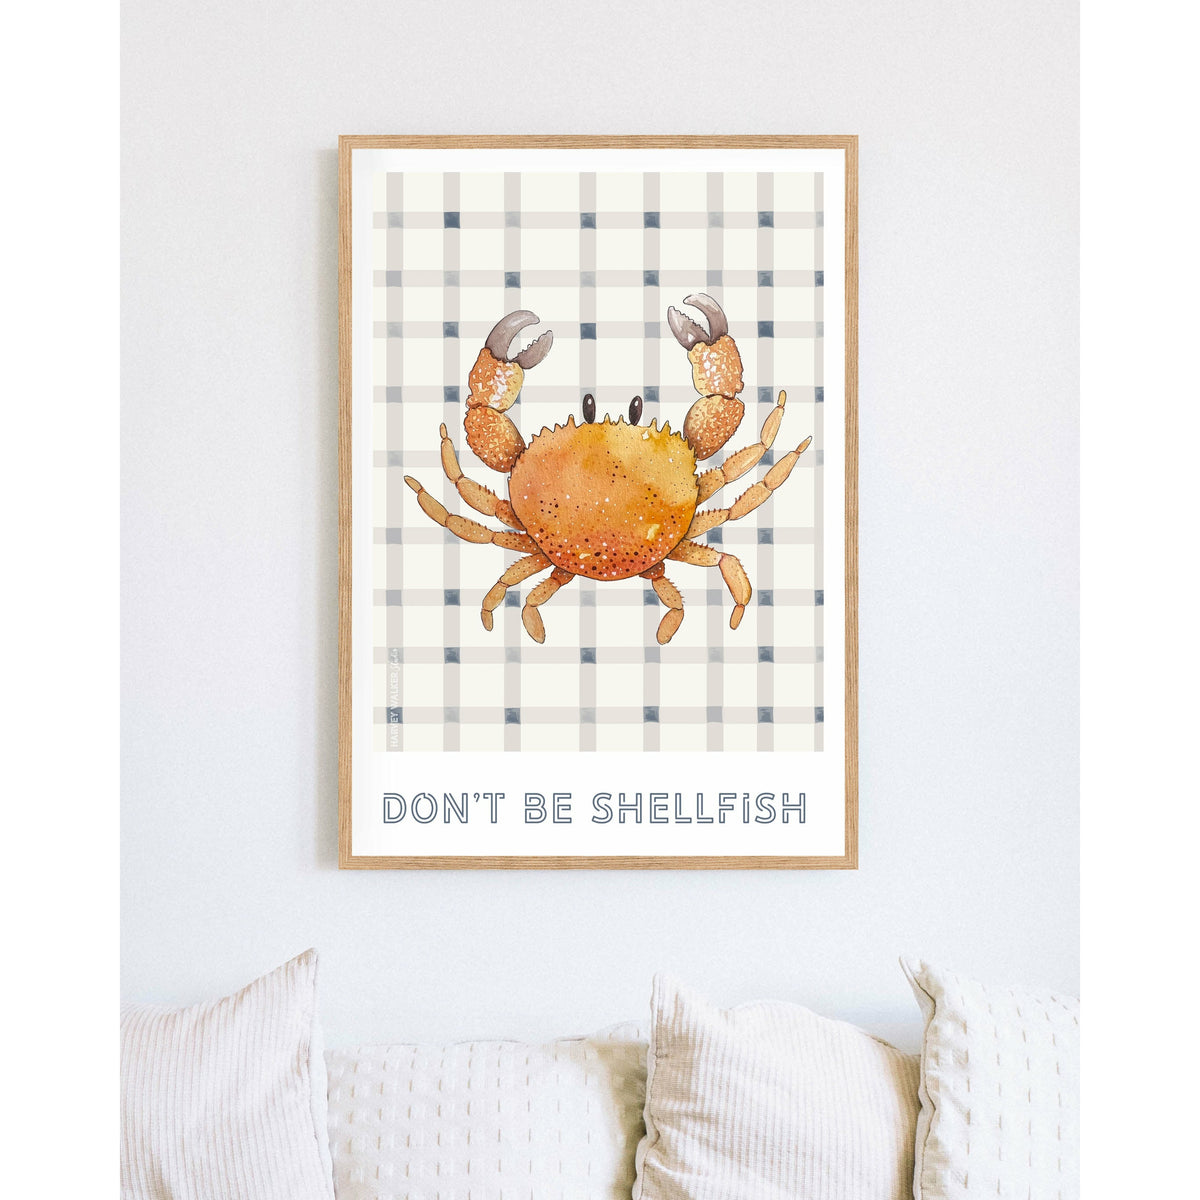 Framed in australian oak, this fun coastal print should be enjoyed by kids and adults alike. Hamptons home inspired and great for a fun renovation reveal.